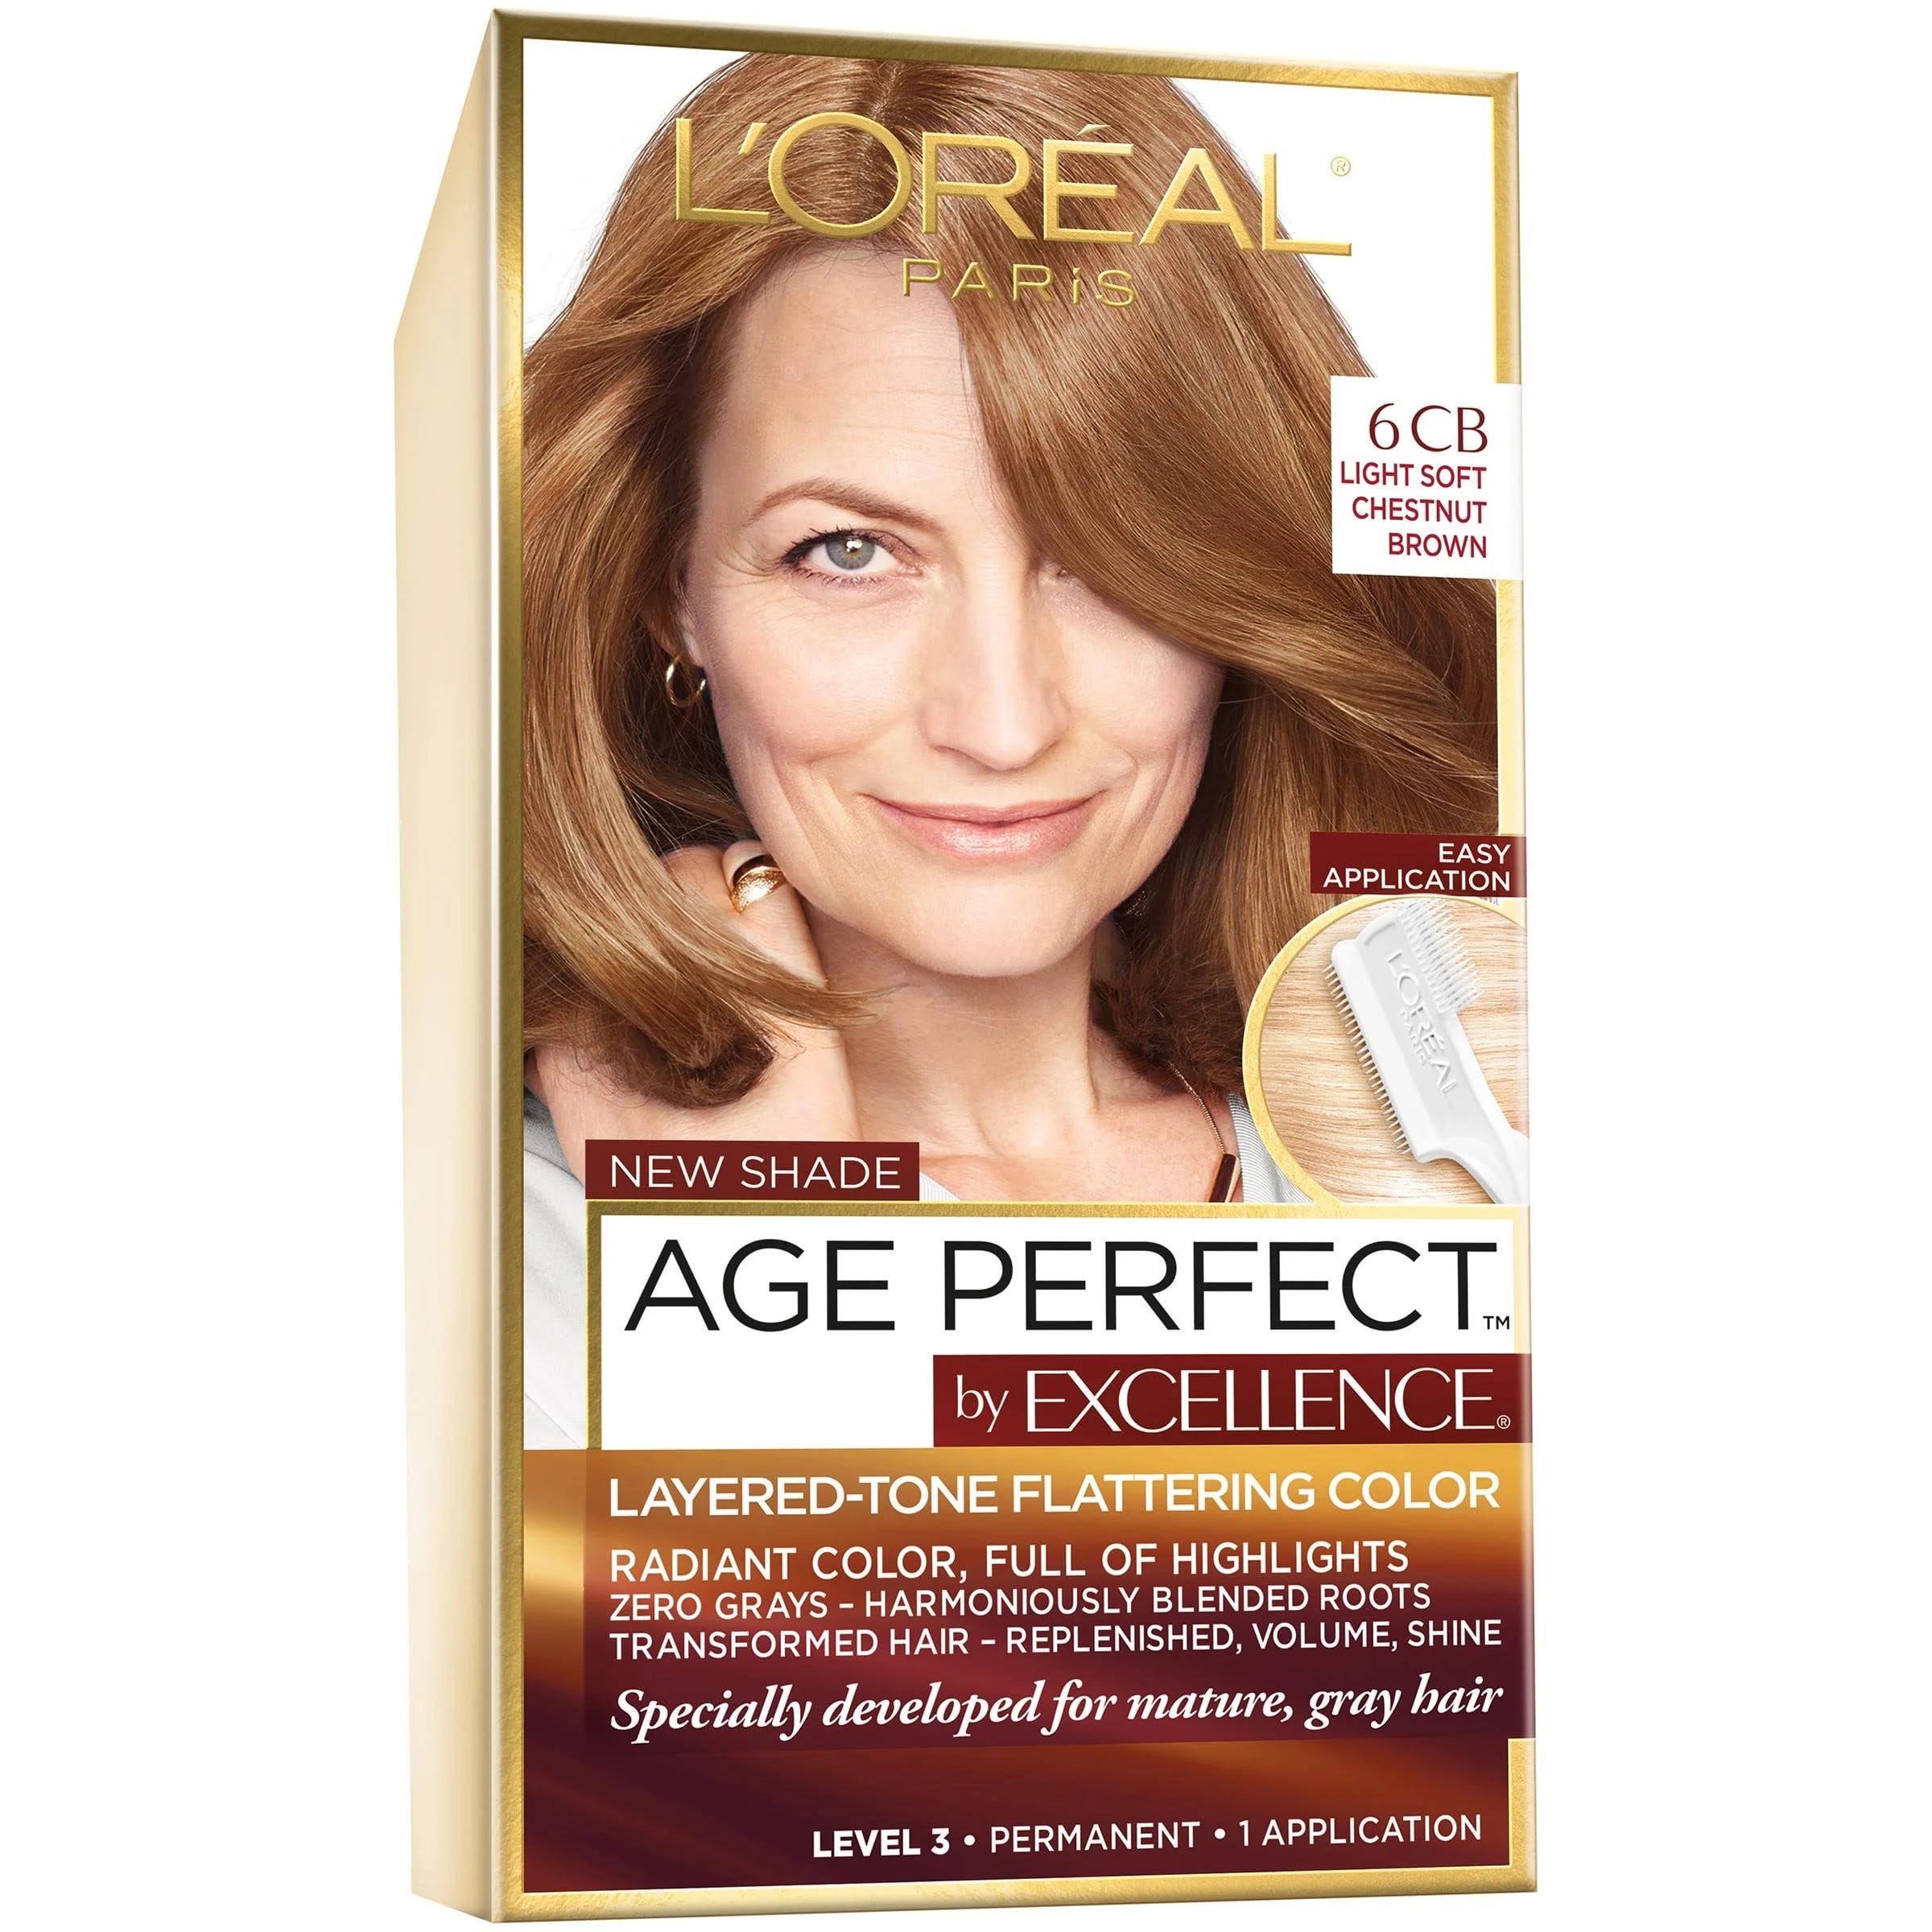 L'Oreal Age Perfect Permanent Hair Color for Mature Hair - Light Soft Chestnut Brown | Image